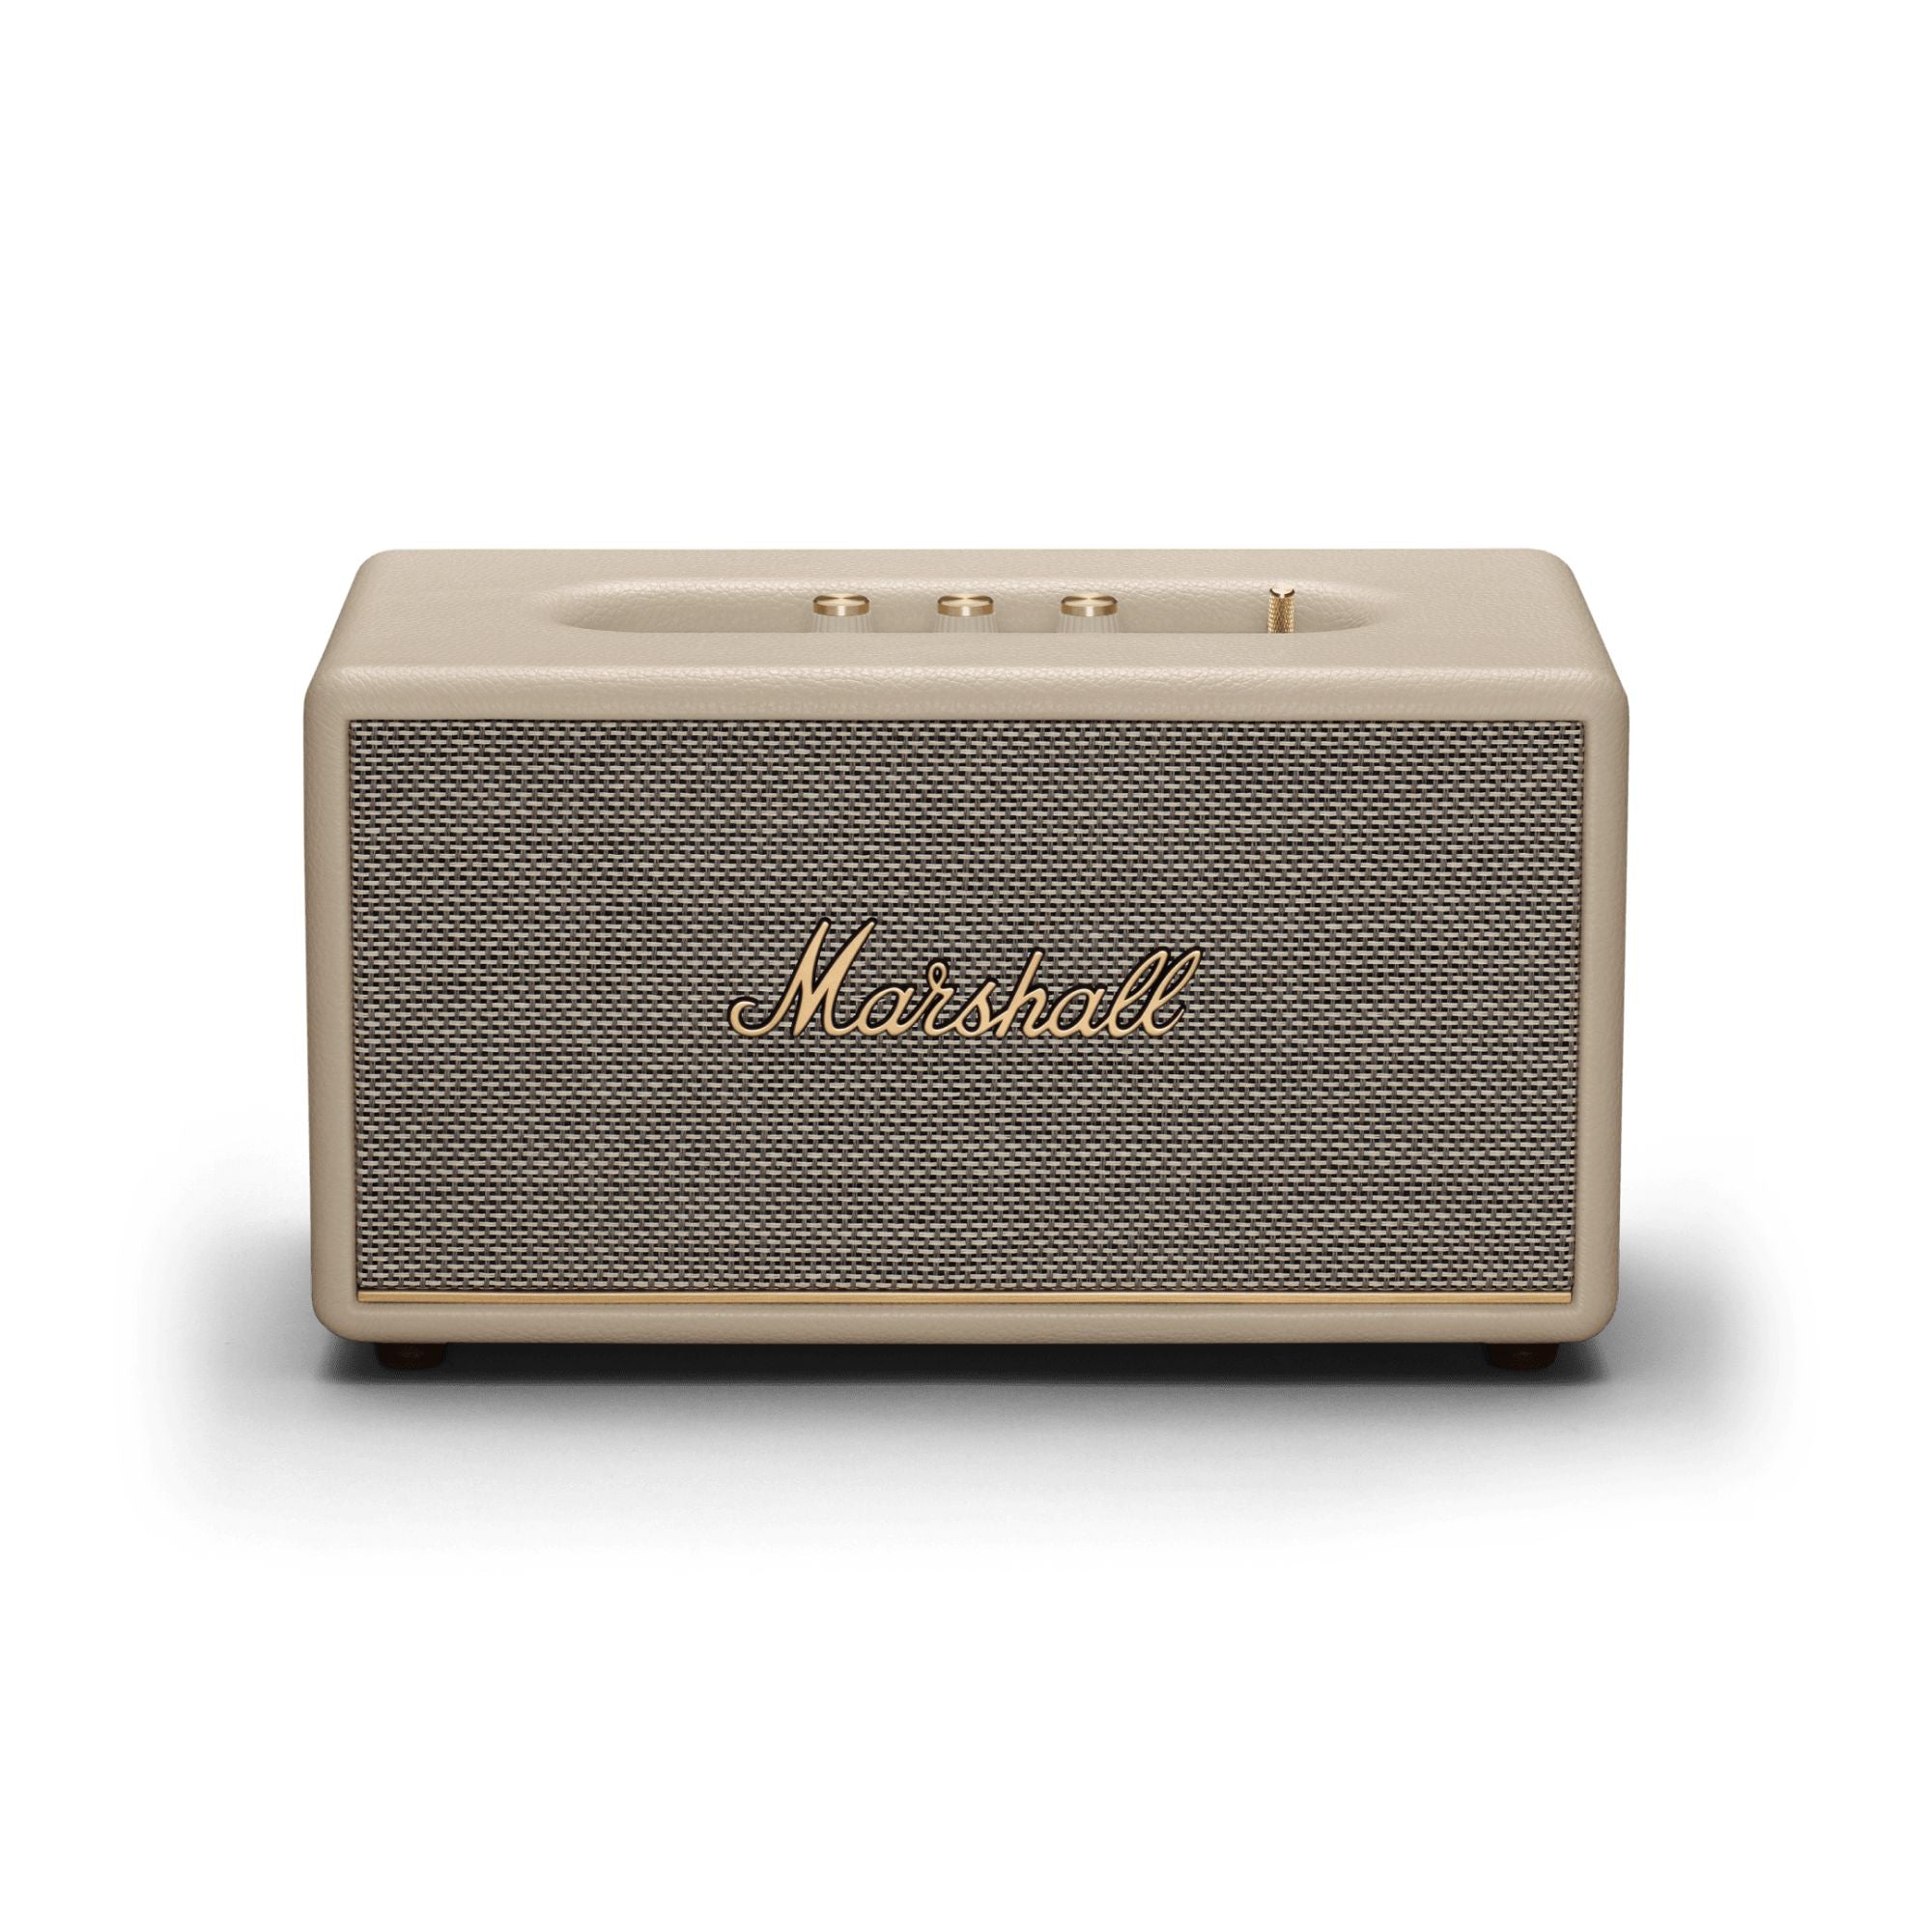 Marshall Stanmore III - The Legendary One Re-Engineered With a Wider Soundstage, Marshall, Bluetooth Speaker - AVStore.in